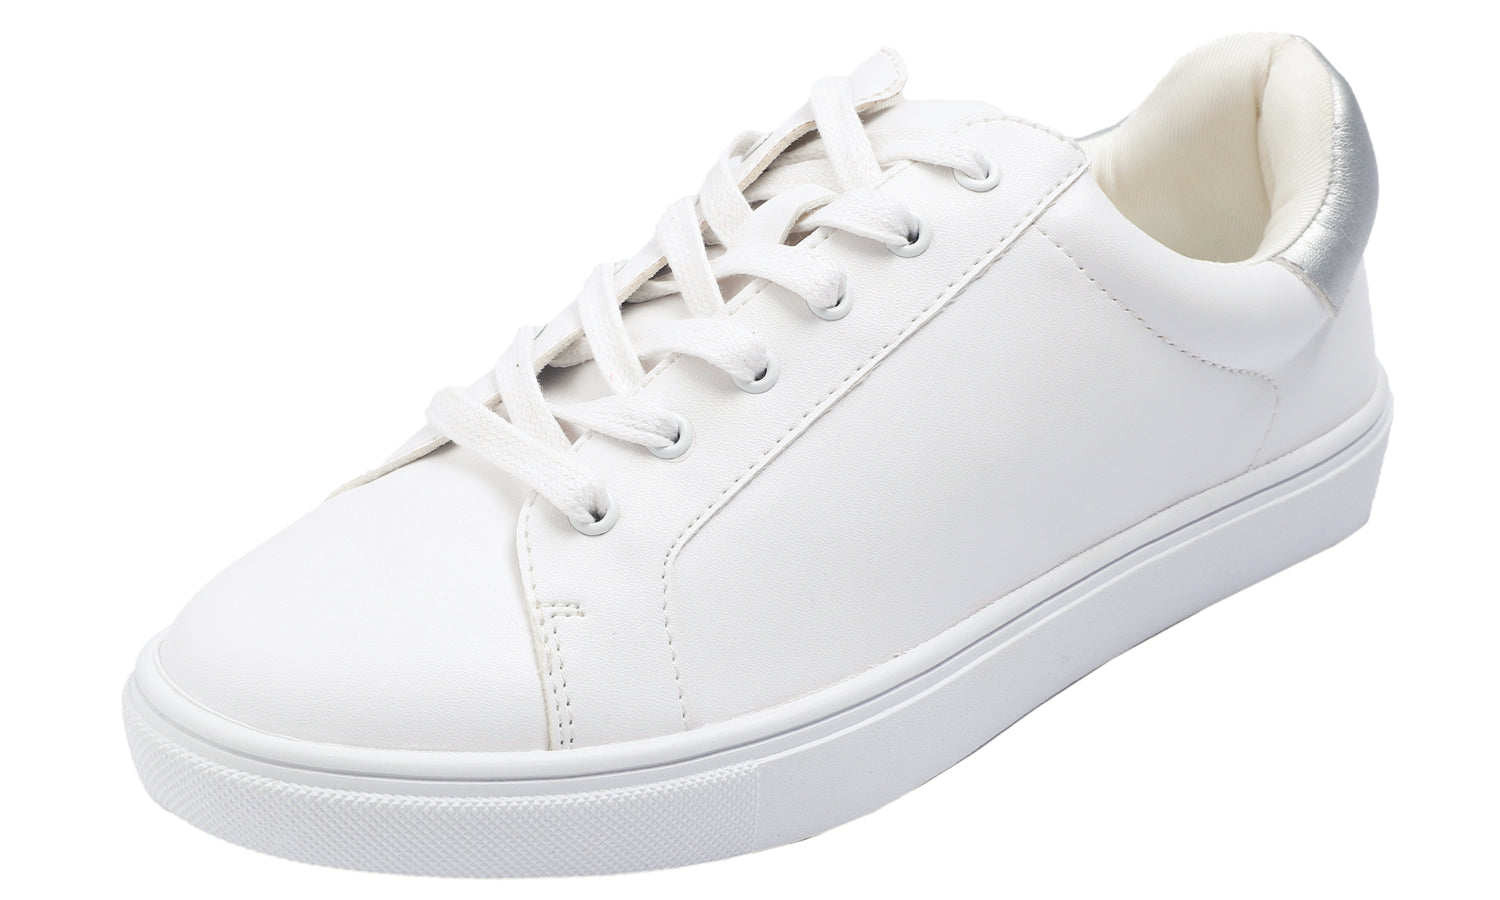 Feversole Women's Featured PU Leather White Silver Lace Up Sneaker